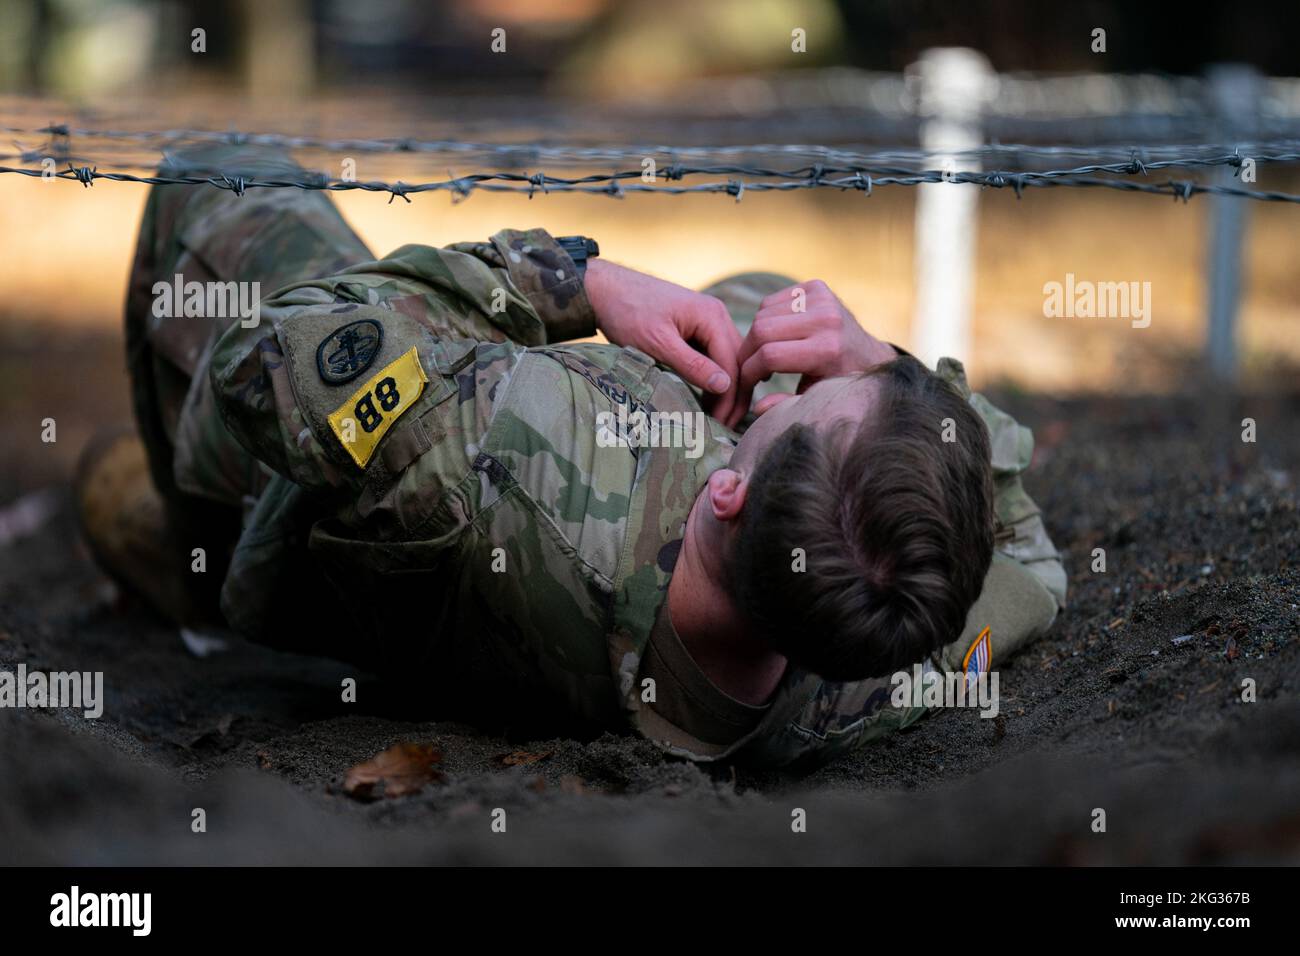 1st Lt. Austin Pinkerton from Bassett Army Medical Center, Fort Wainwright, crawls under the Low Wire during the Obstacle Course Test in the 2022 Medical Readiness Command, Pacific Best Medic Competition Wednesday, October 26th 2022 at Joint Base Lewis-McChord. Stock Photo